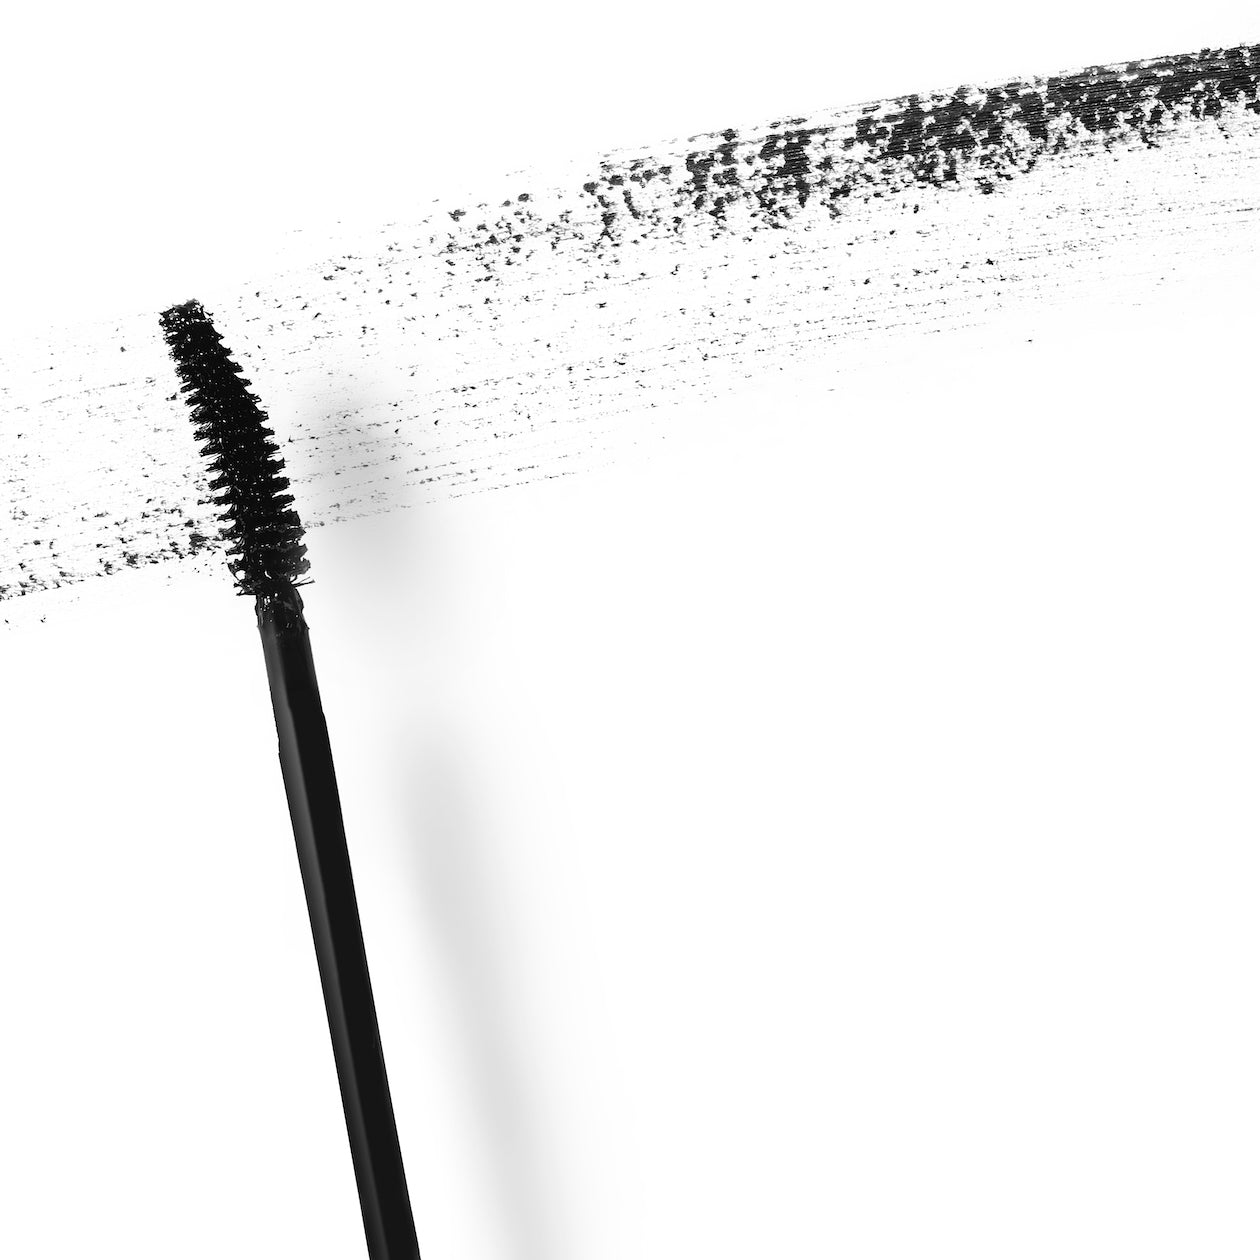 c'est beau1872 beauty - don't forget about me mascara in black